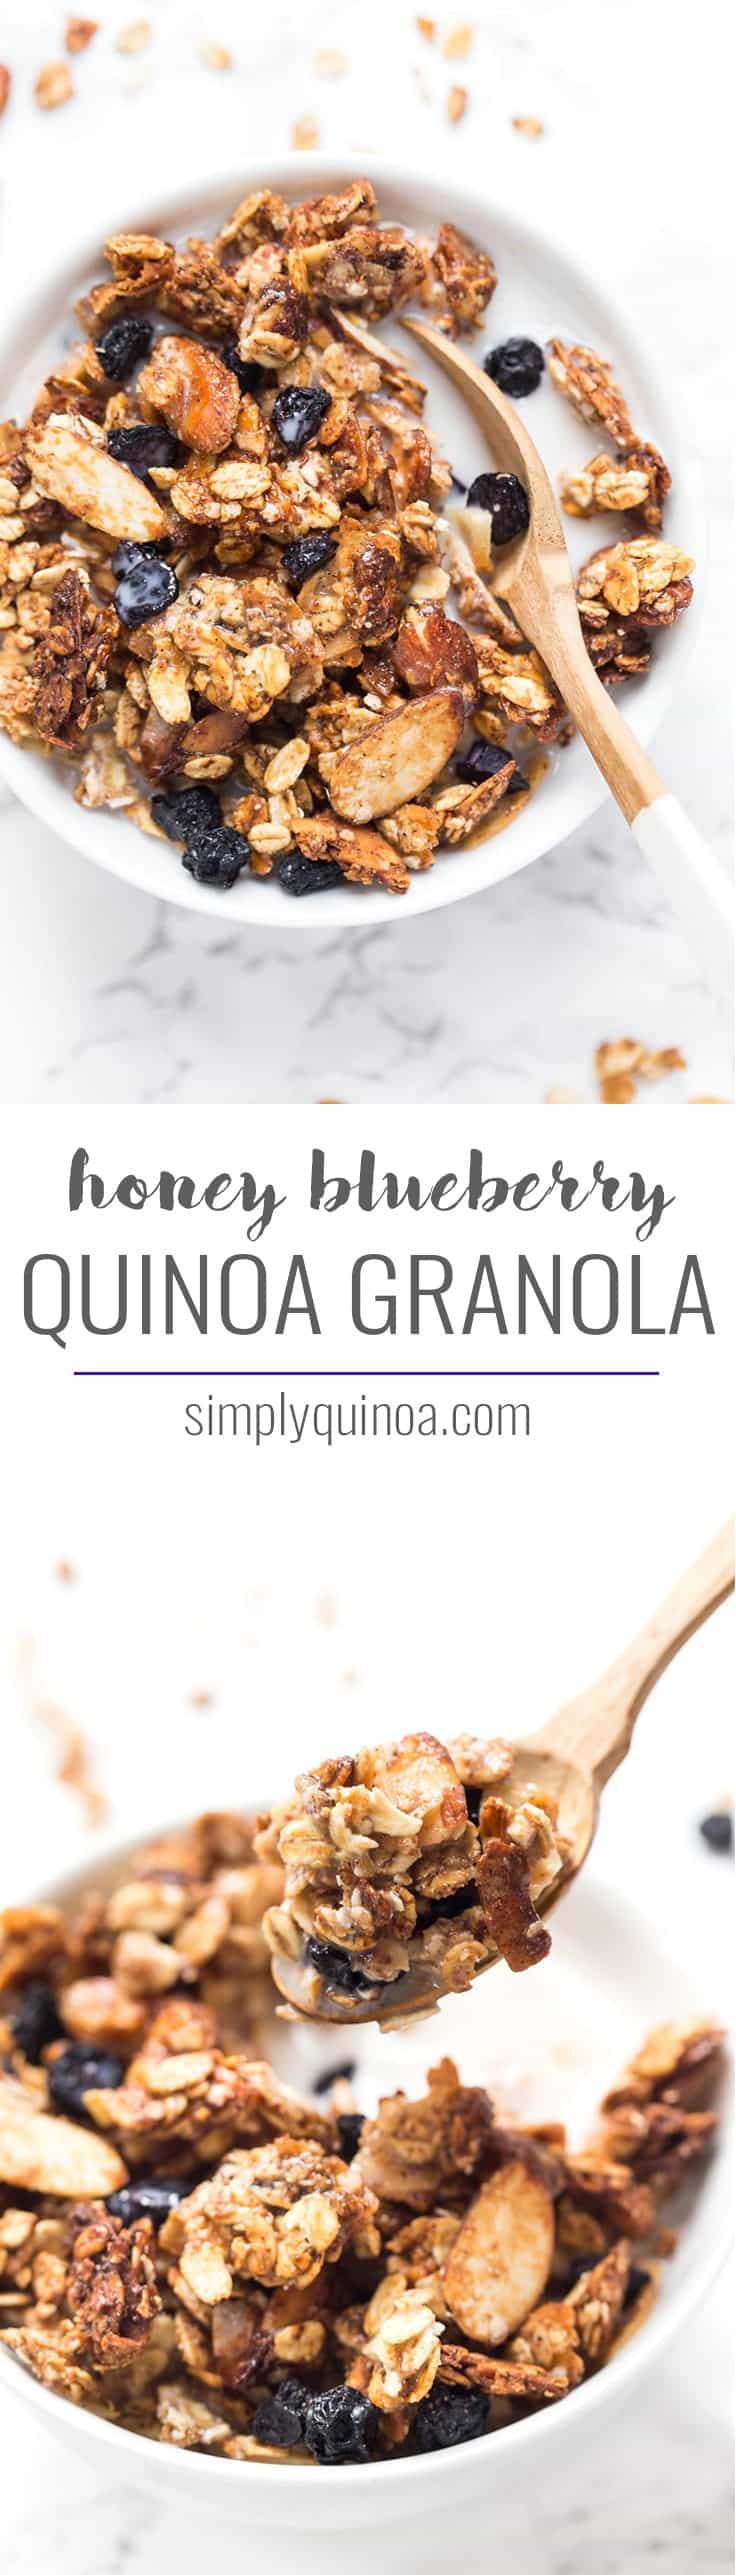 Whip up this delicious HONEY BLUEBERRY QUINOA GRANOLA for breakfast! Healthy, gluten-free, flavorful and fiber rich to keep you full all morning long!